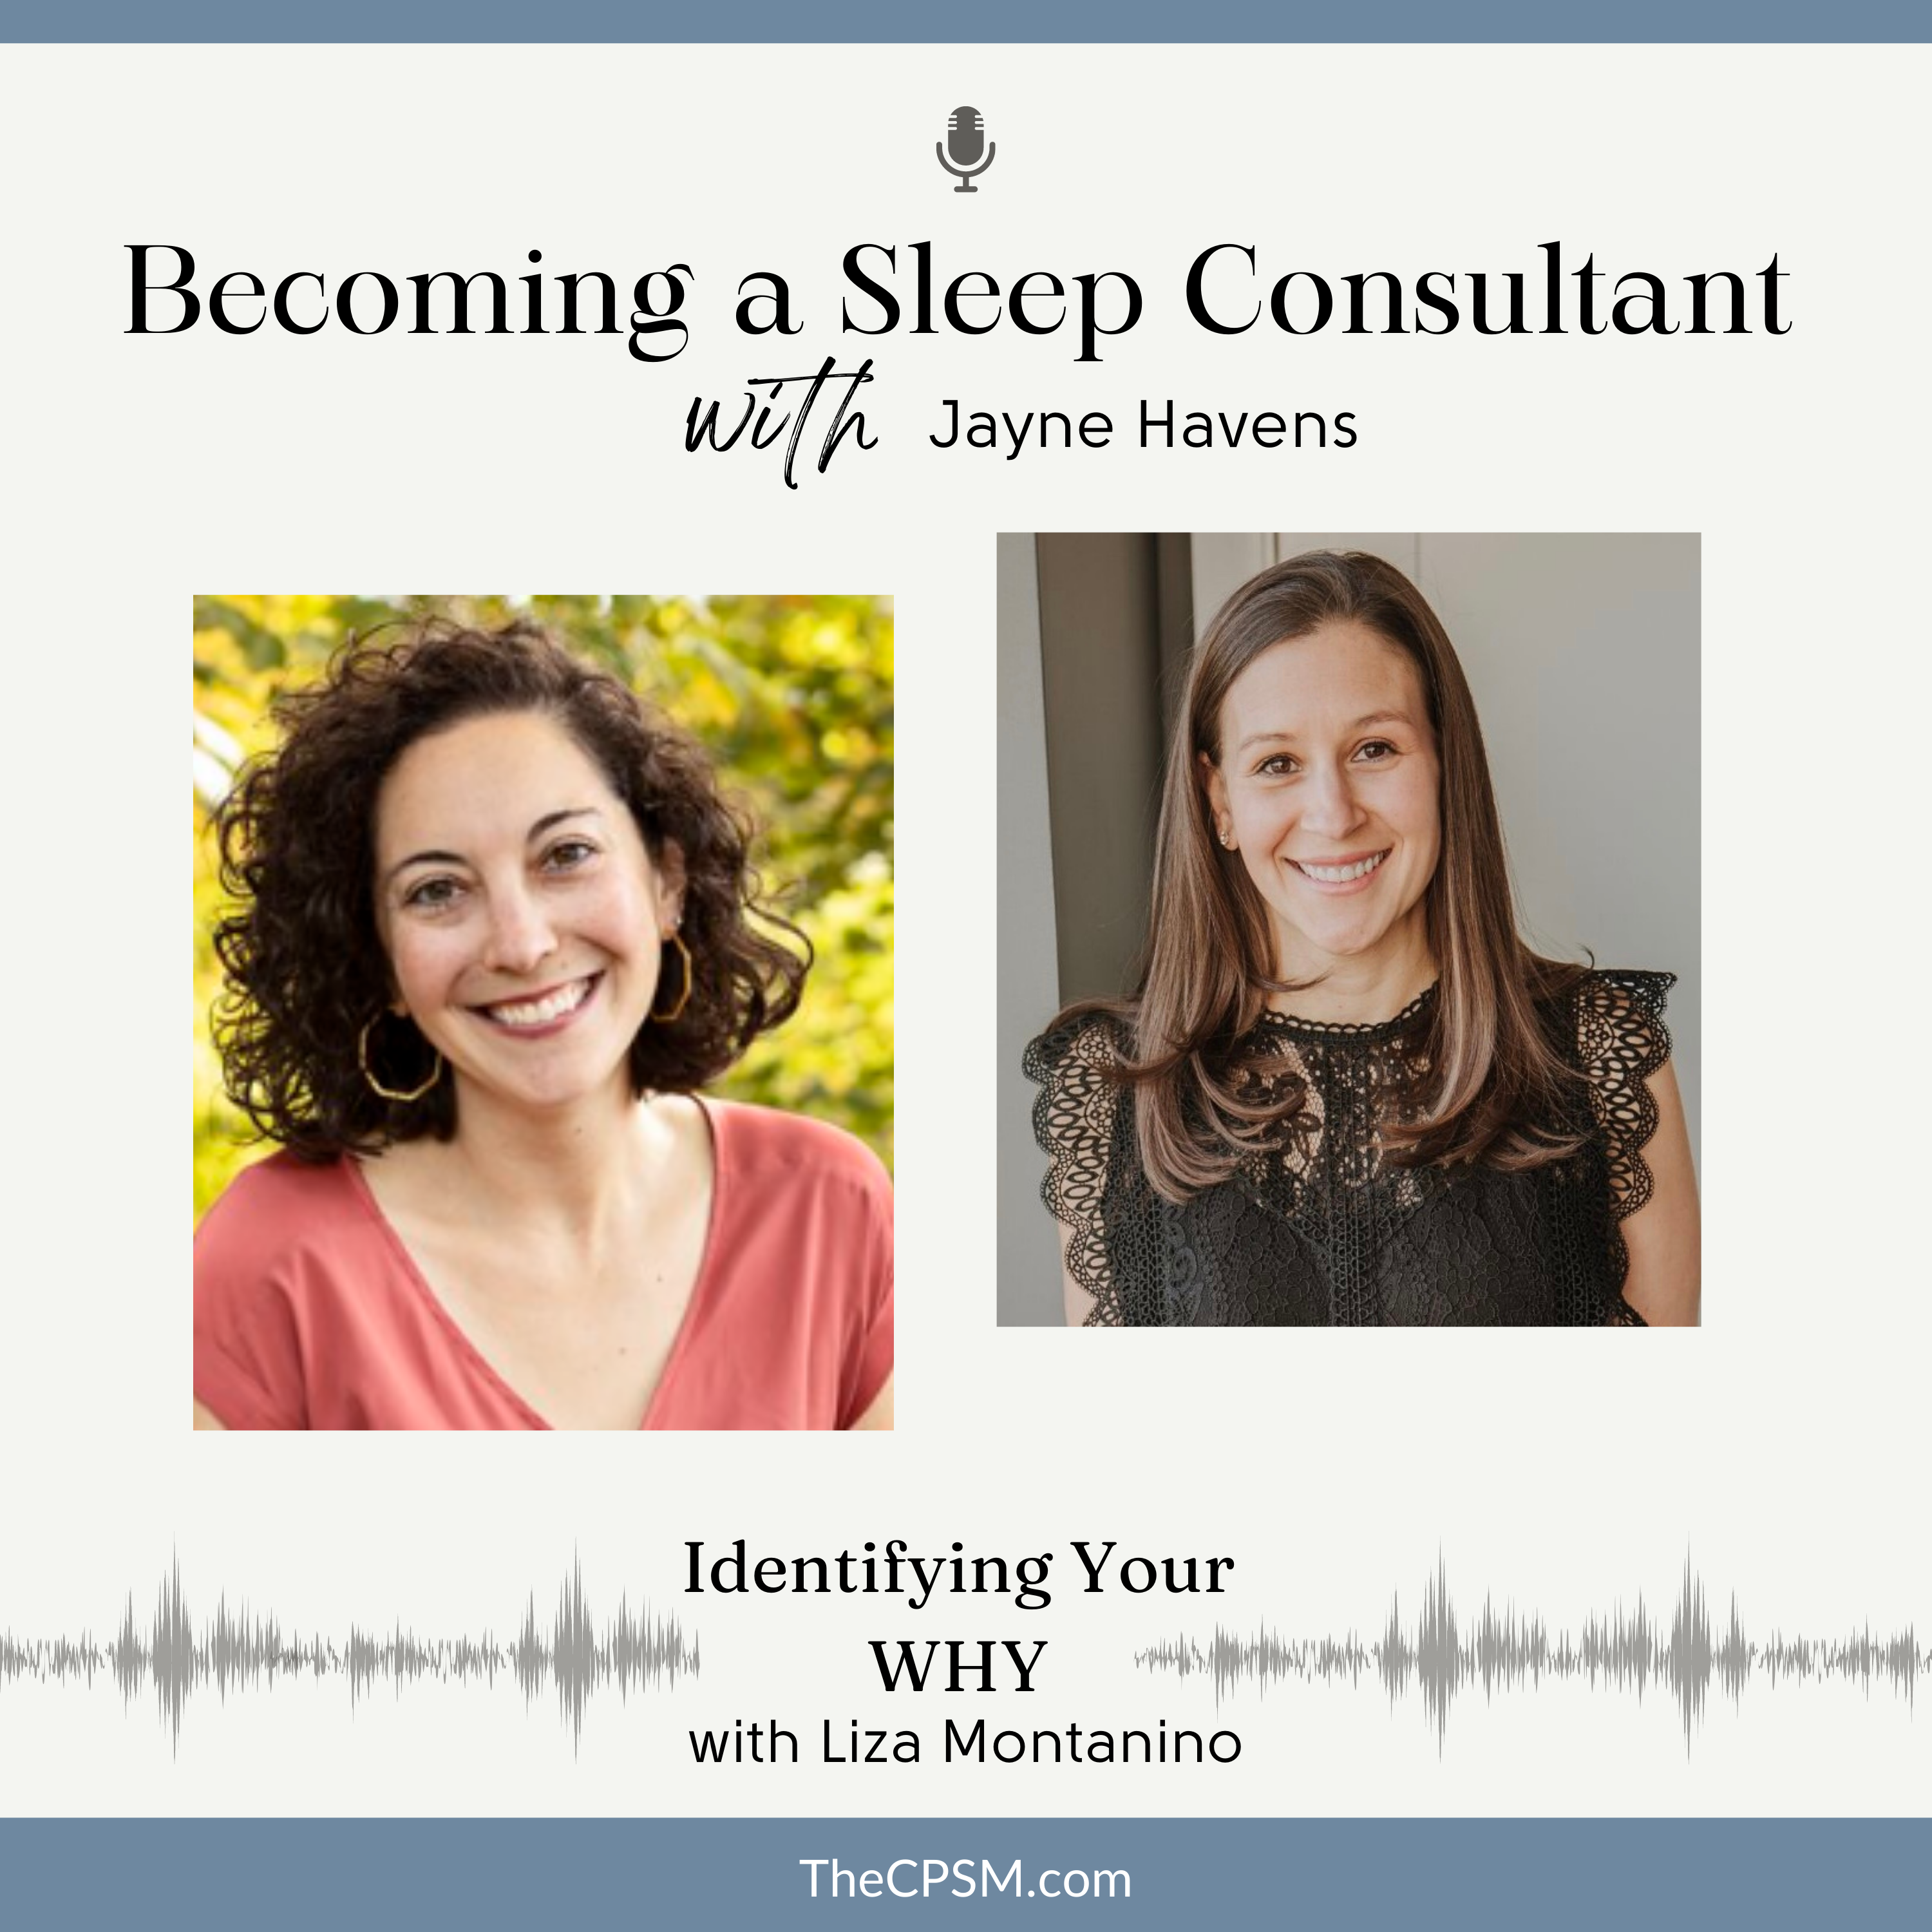 Identifying your WHY with Liza Montanino